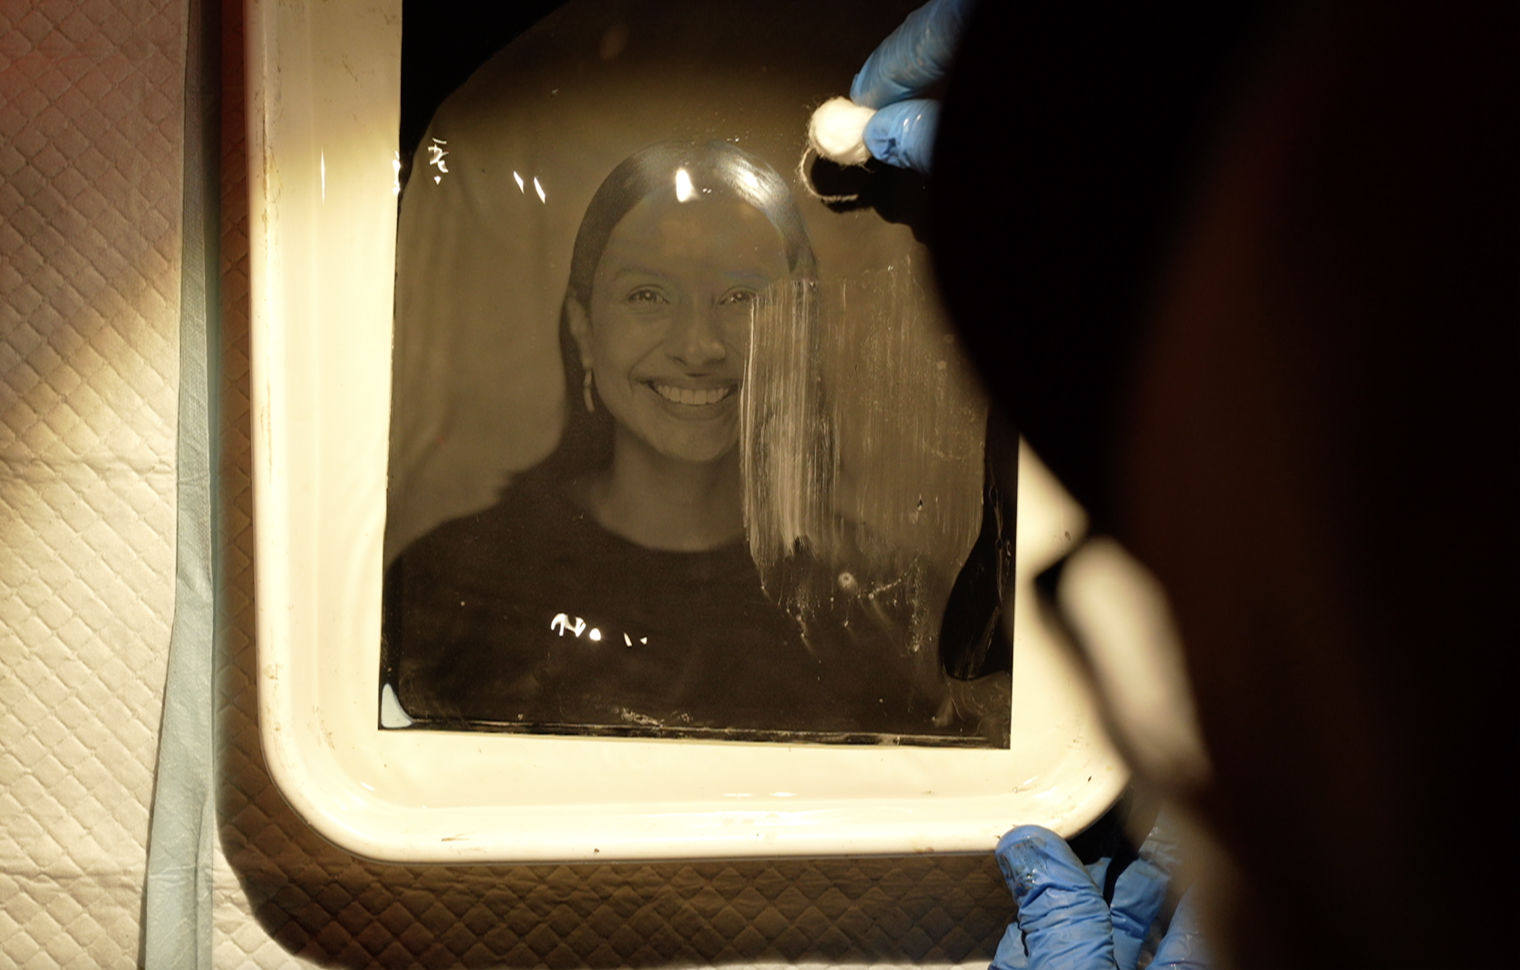 Process of developing a tintype portrait of a smiling woman